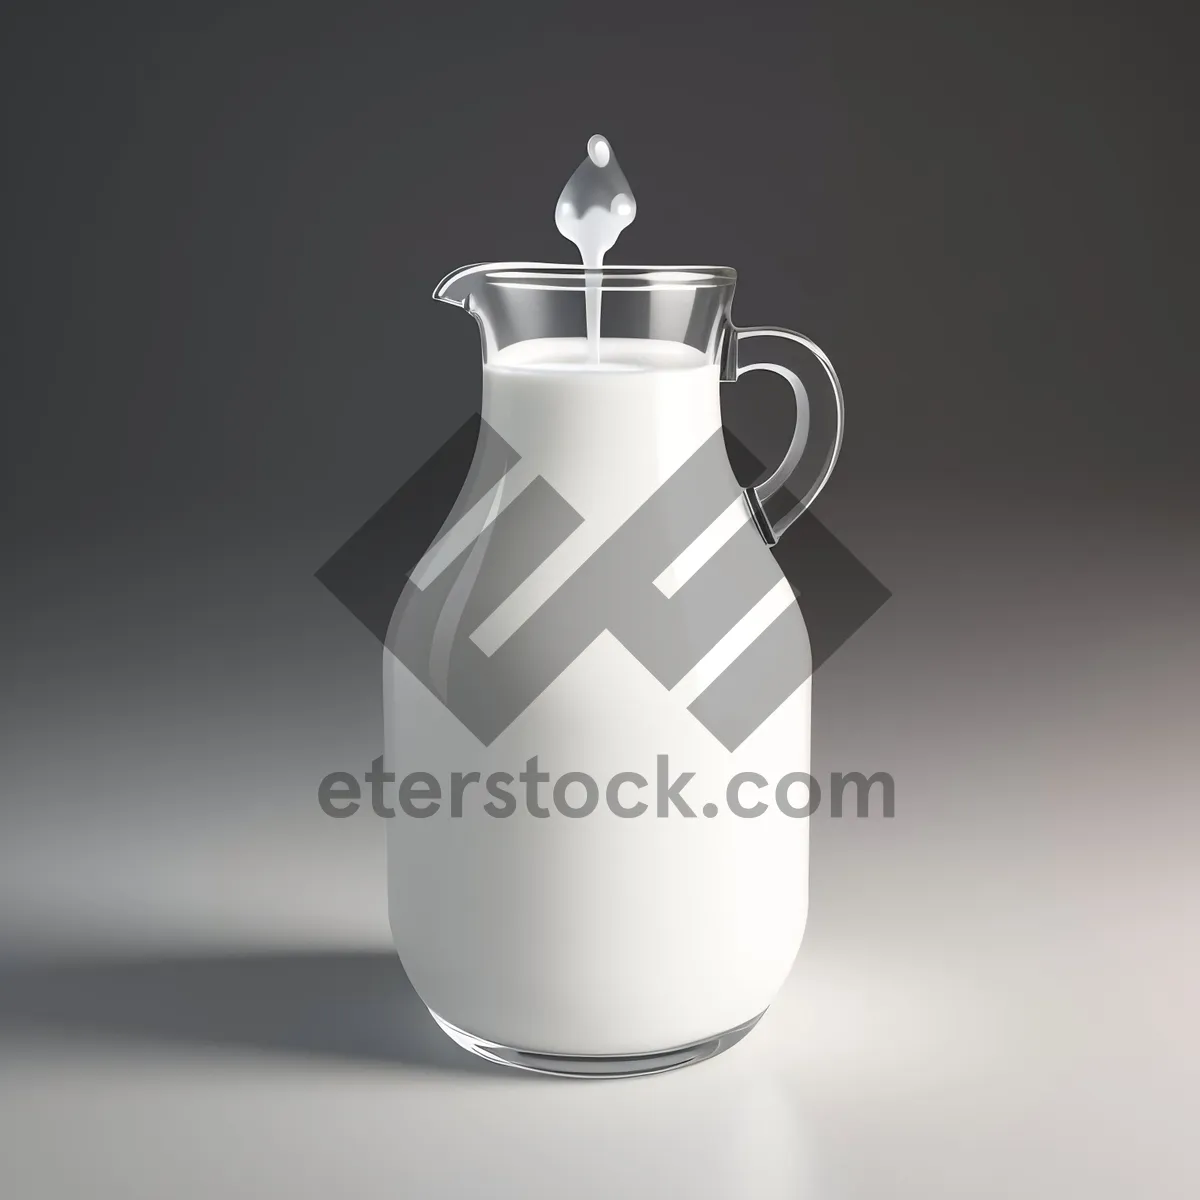 Picture of Glass milk bottle with liquid beverage